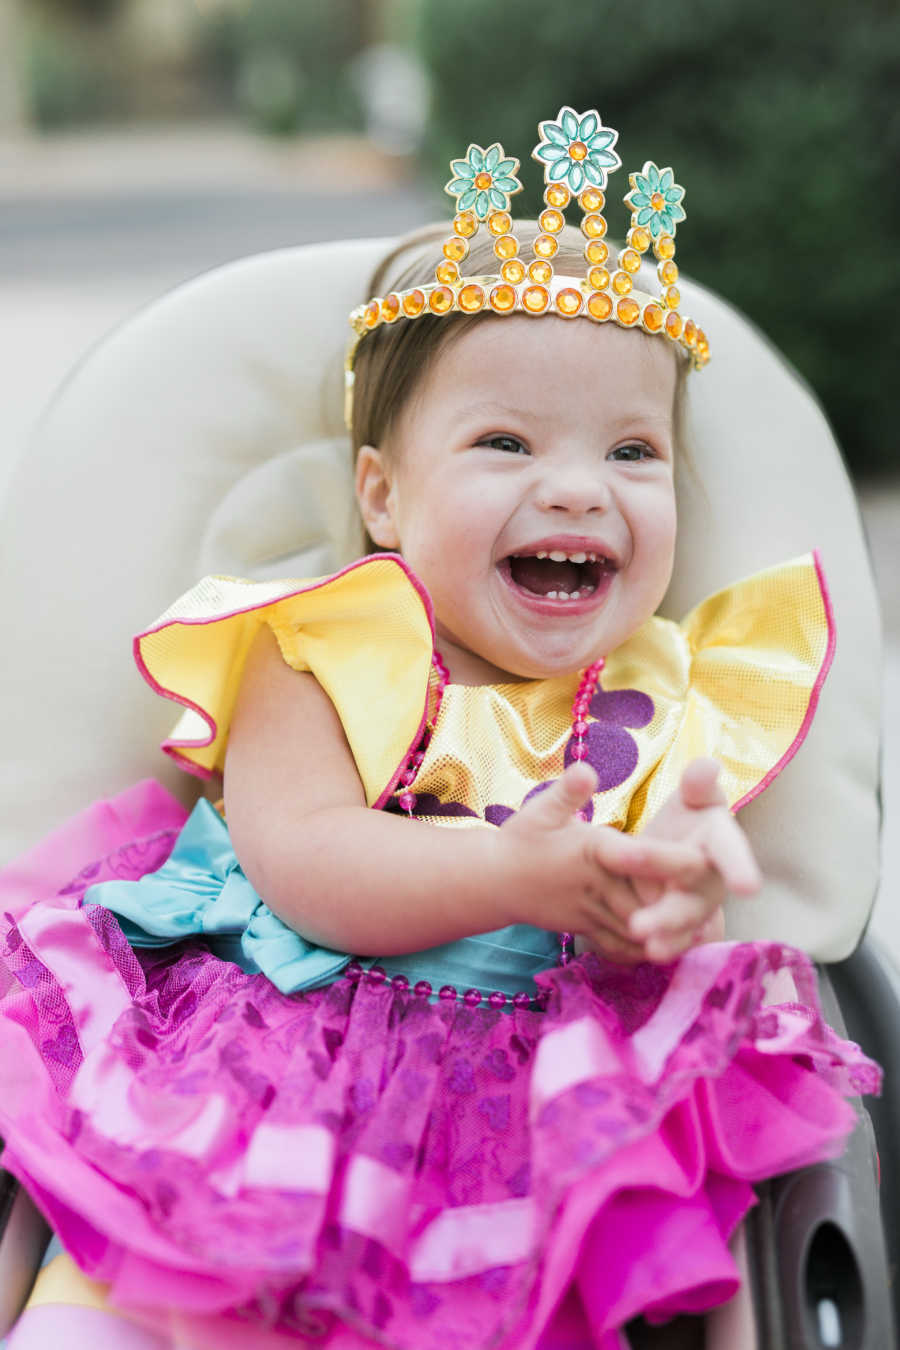 Baby with down syndrome and heart defect sits smiling wearing colorful dress and crown